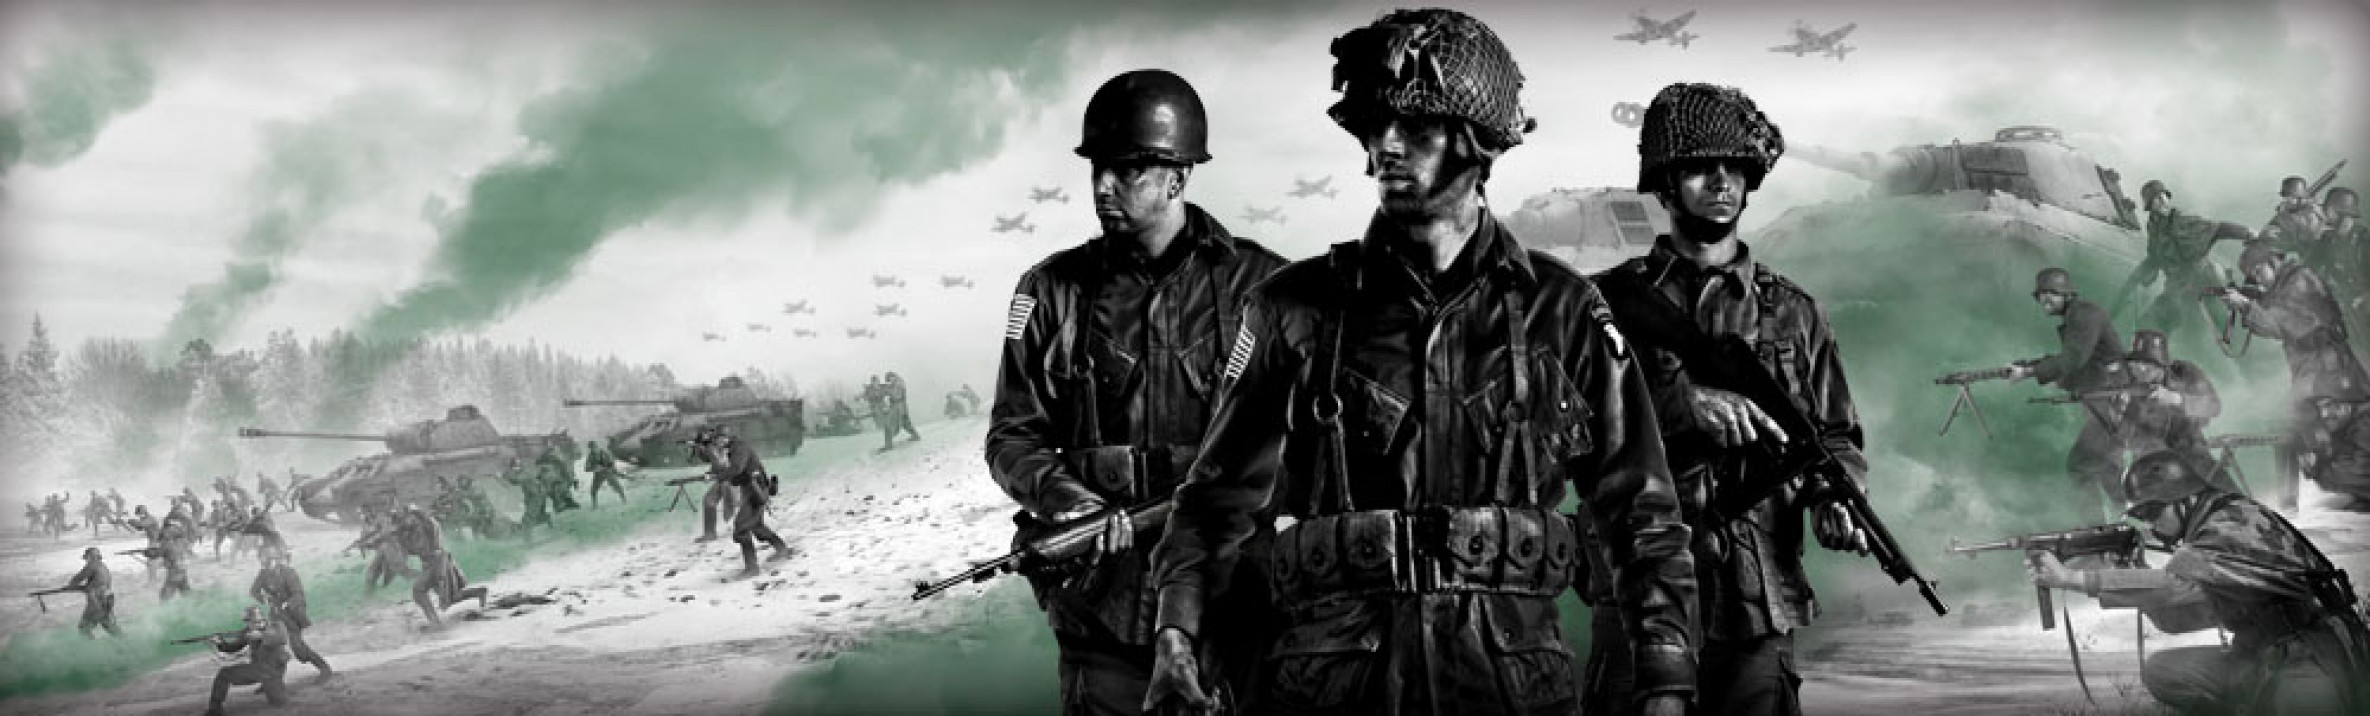 company of heroes 2 ardennes assault cover image